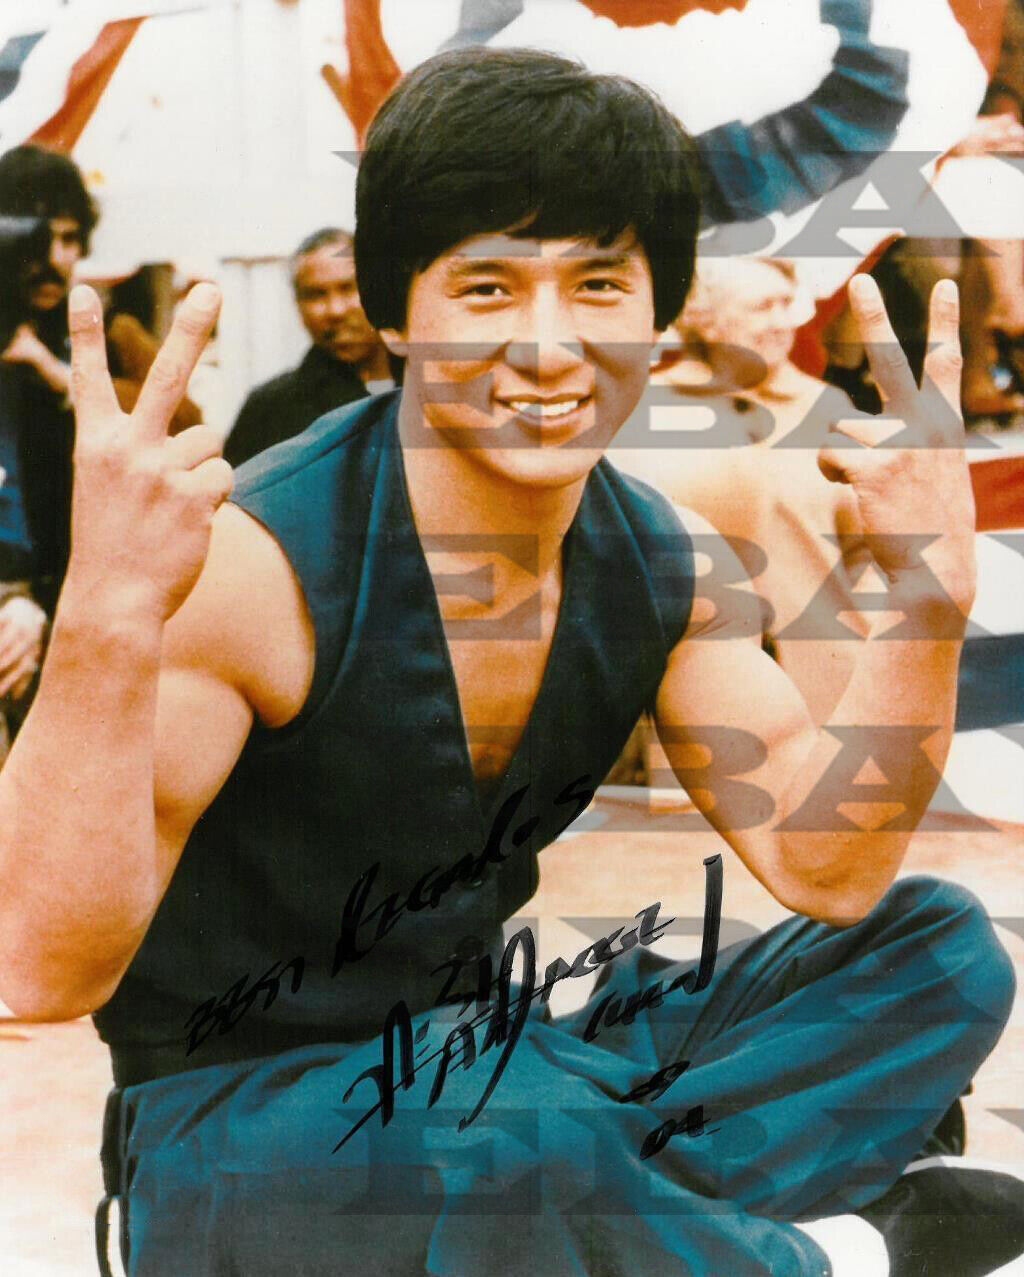 Jackie Chan Autographed Signed 8x10 Photo Poster painting Reprint